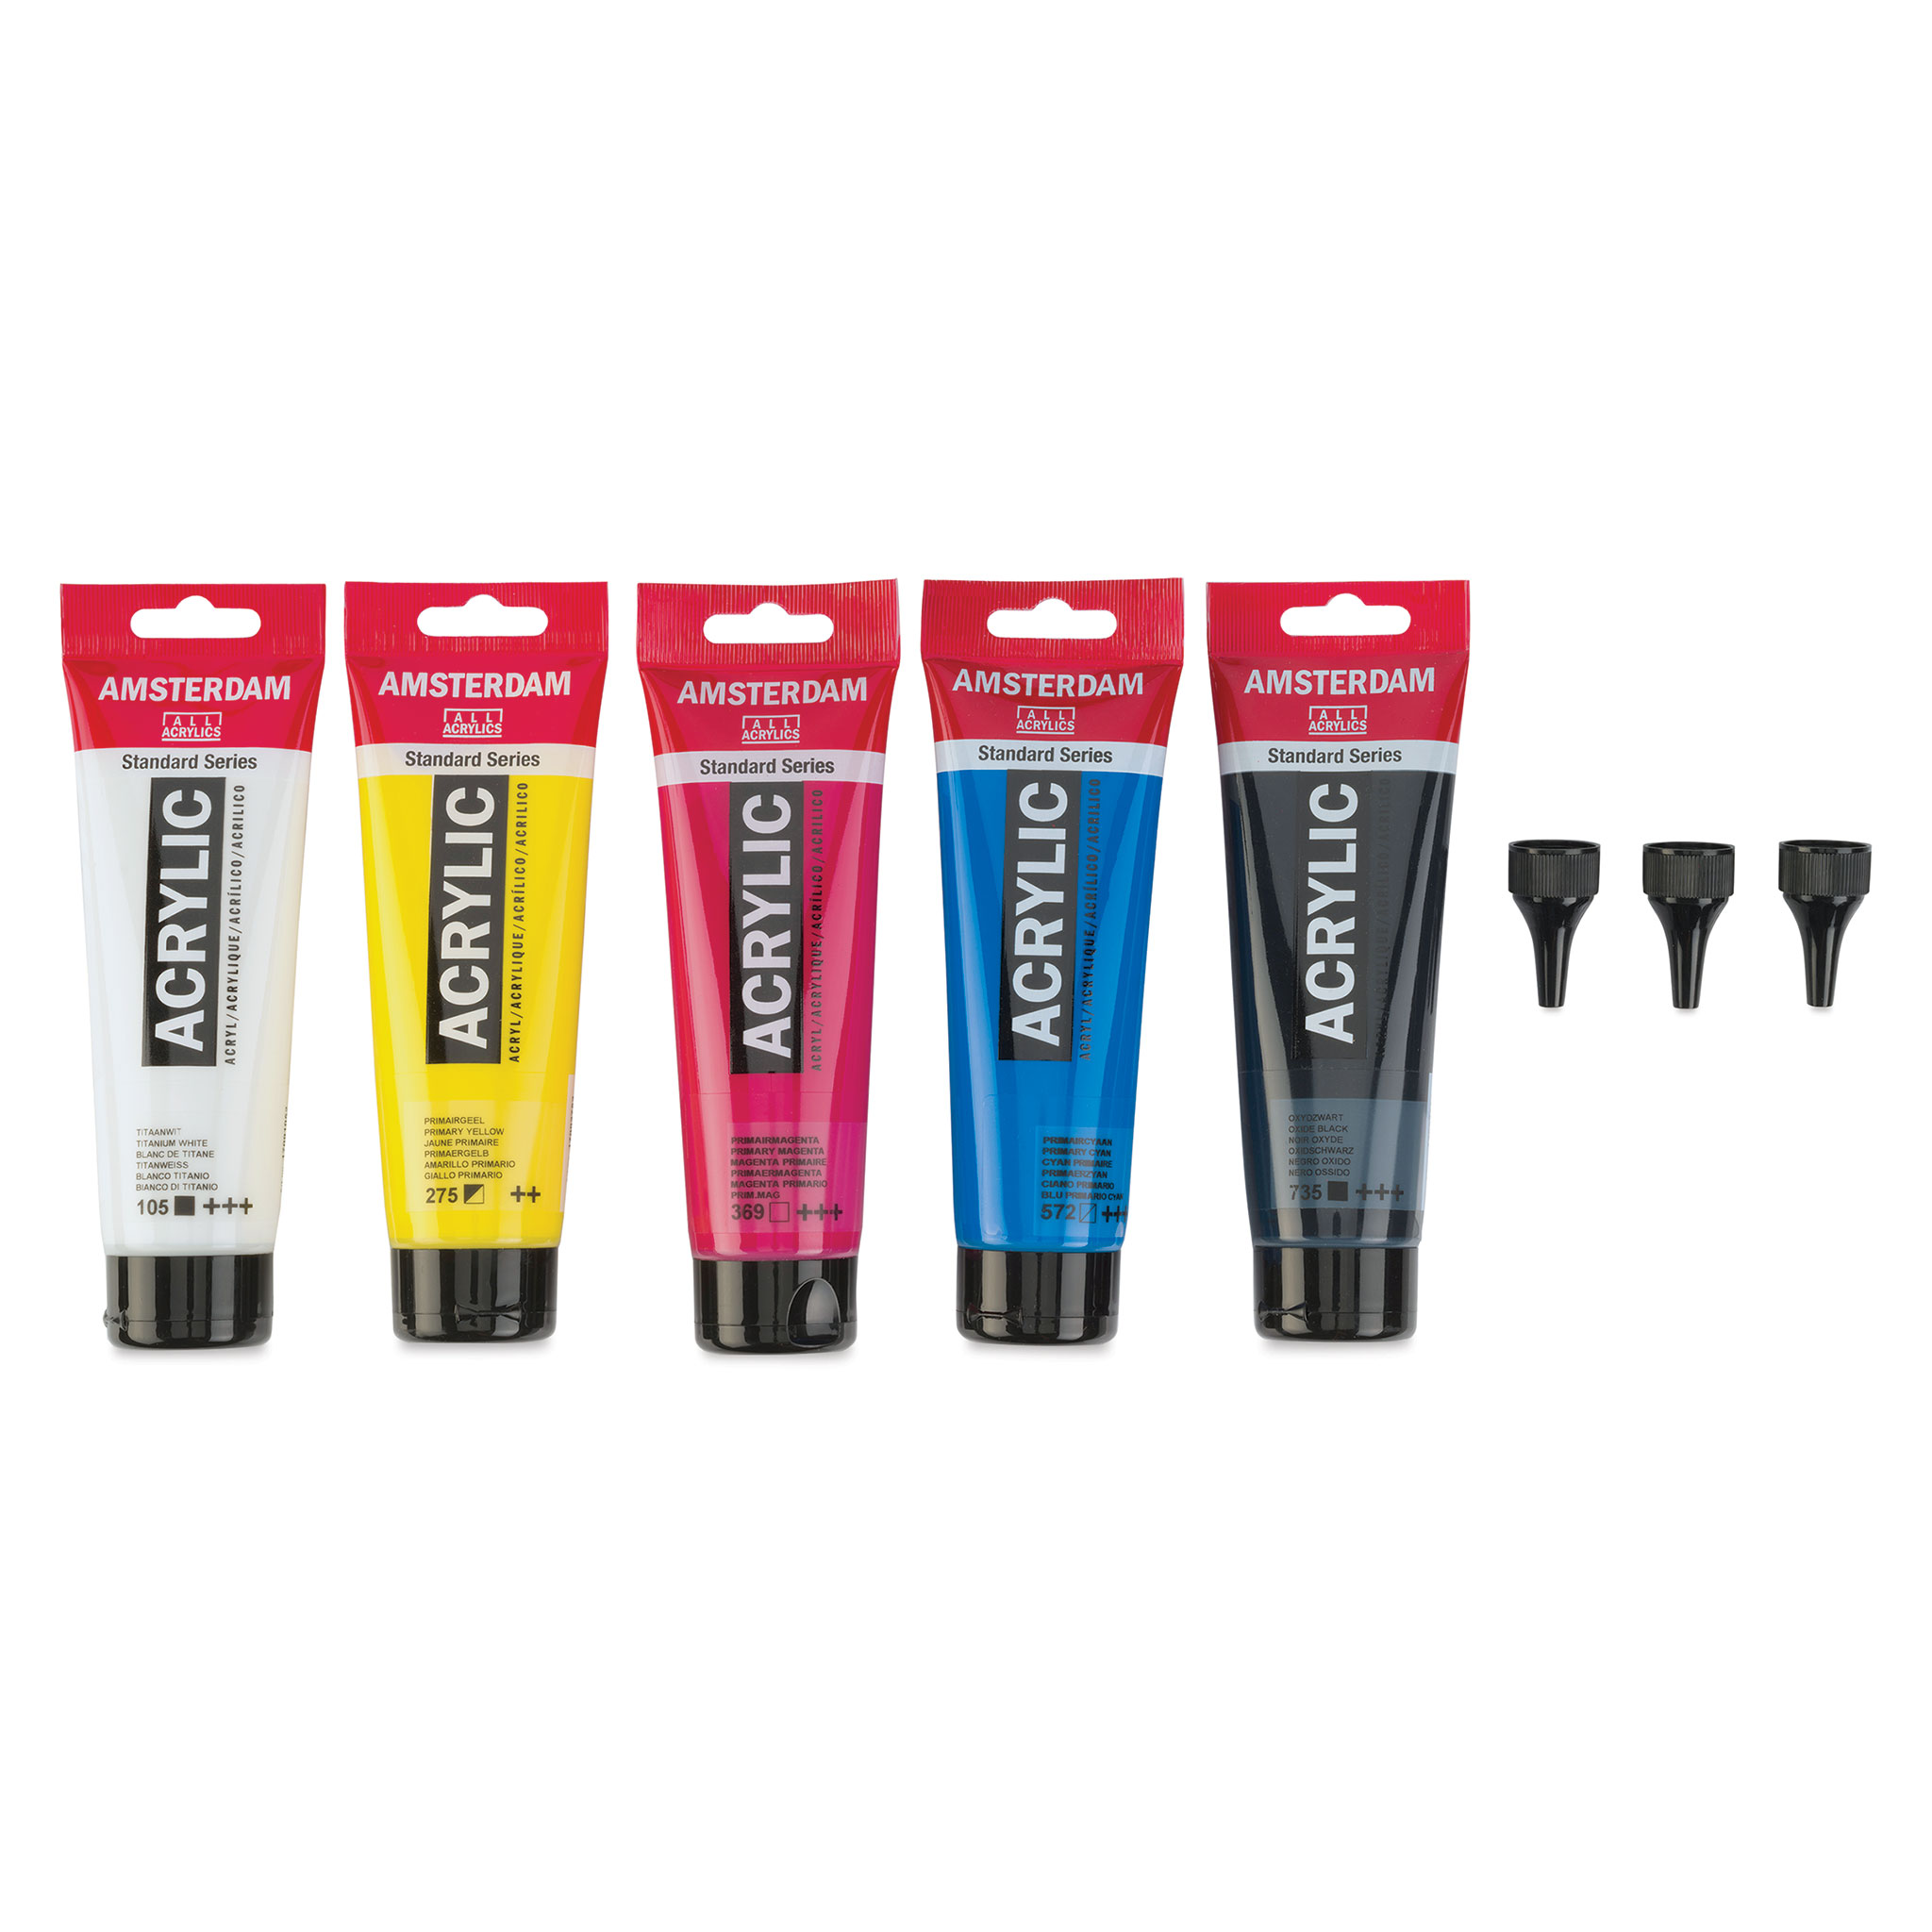 Standard Series acrylic paint general selection set